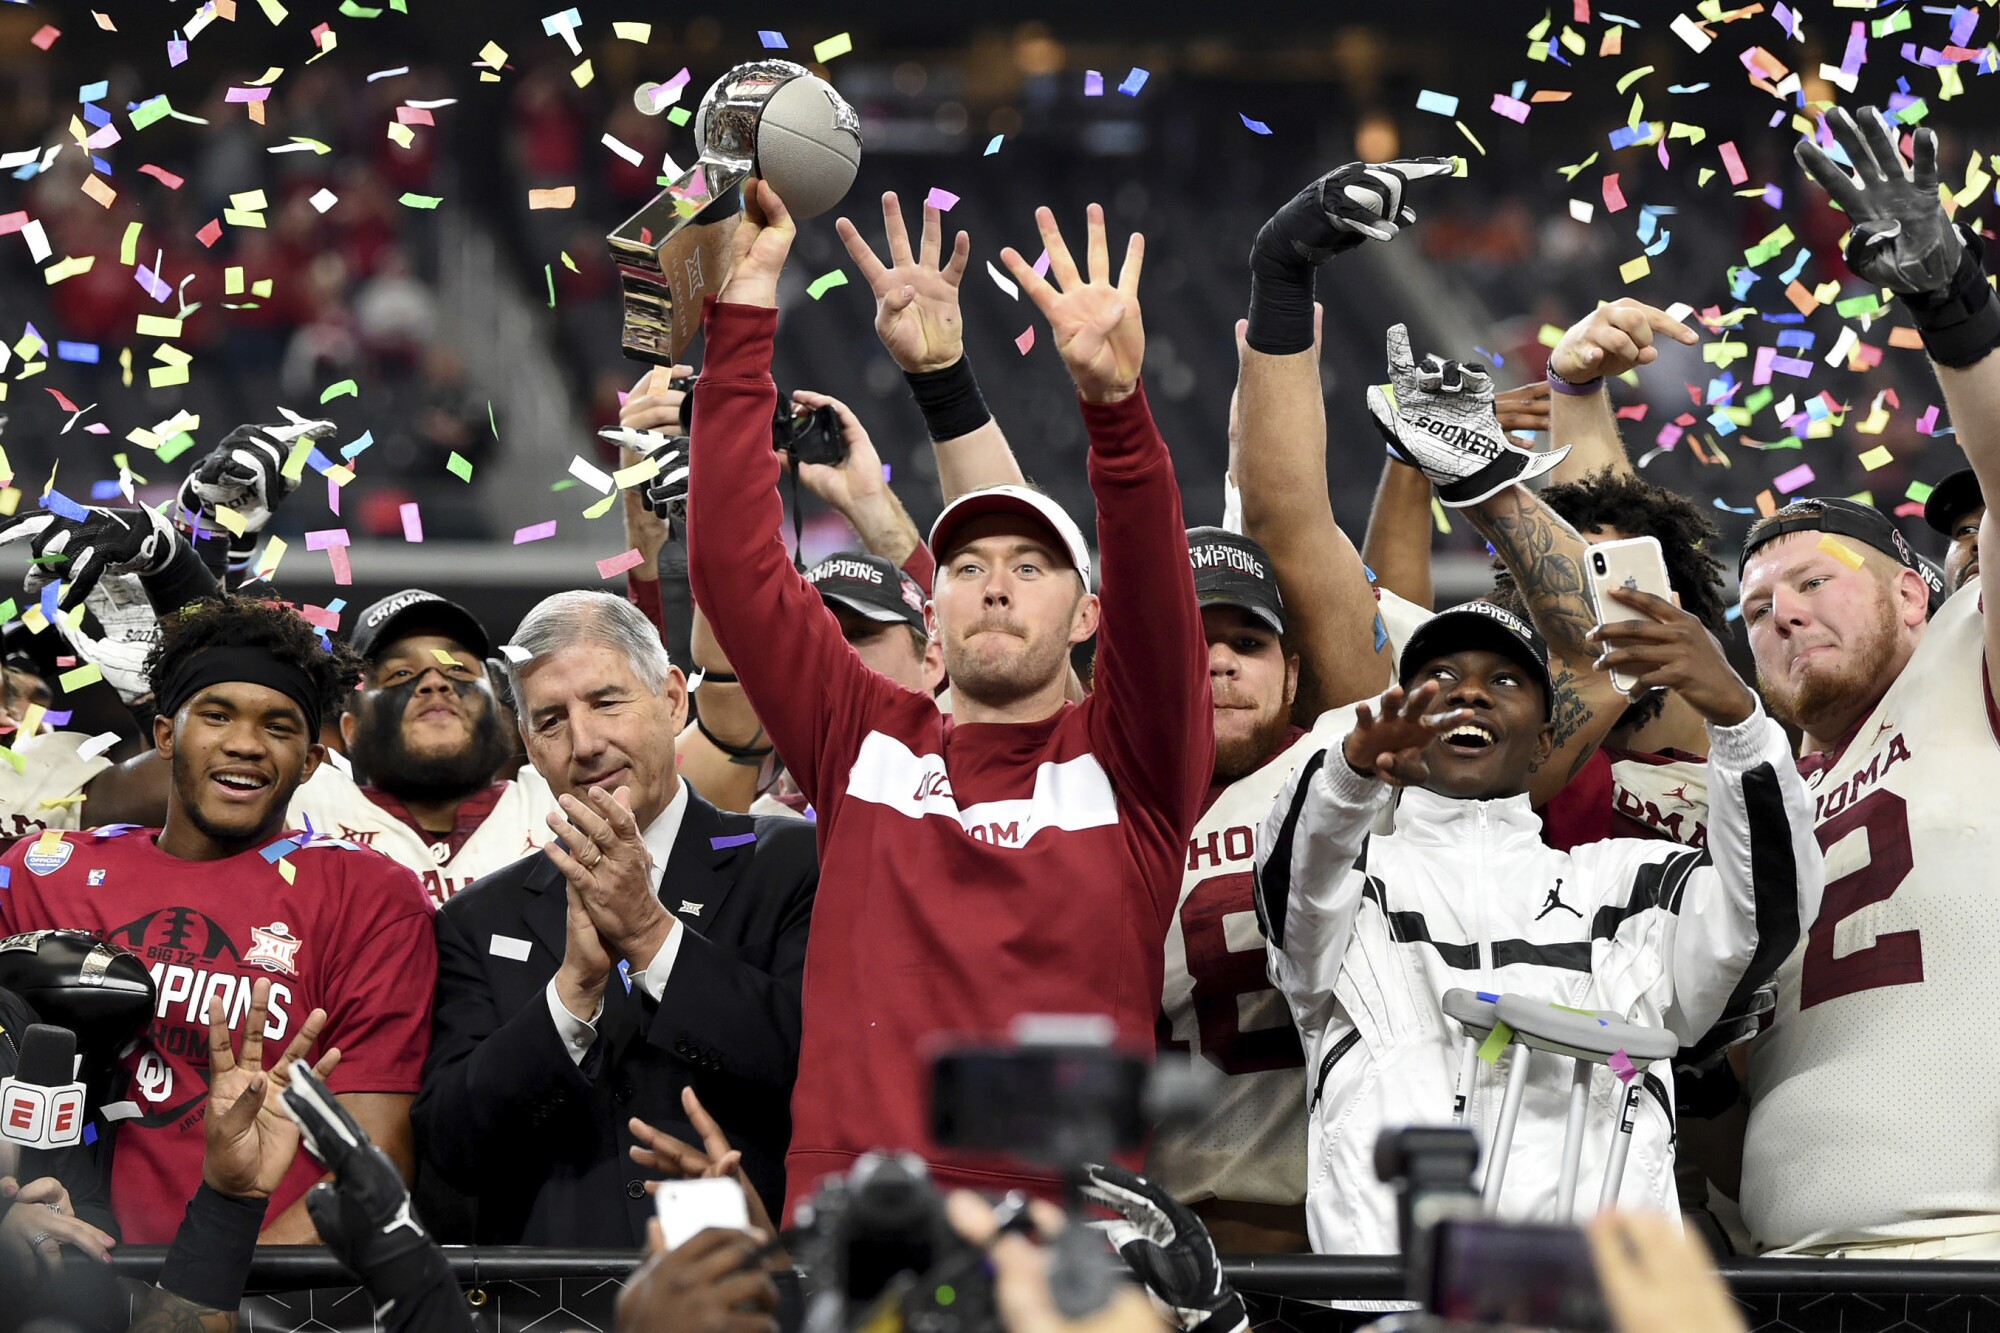 Oklahoma coach Lincoln Riley holds up the Big 12 championship trophy after beating Texas in 2018